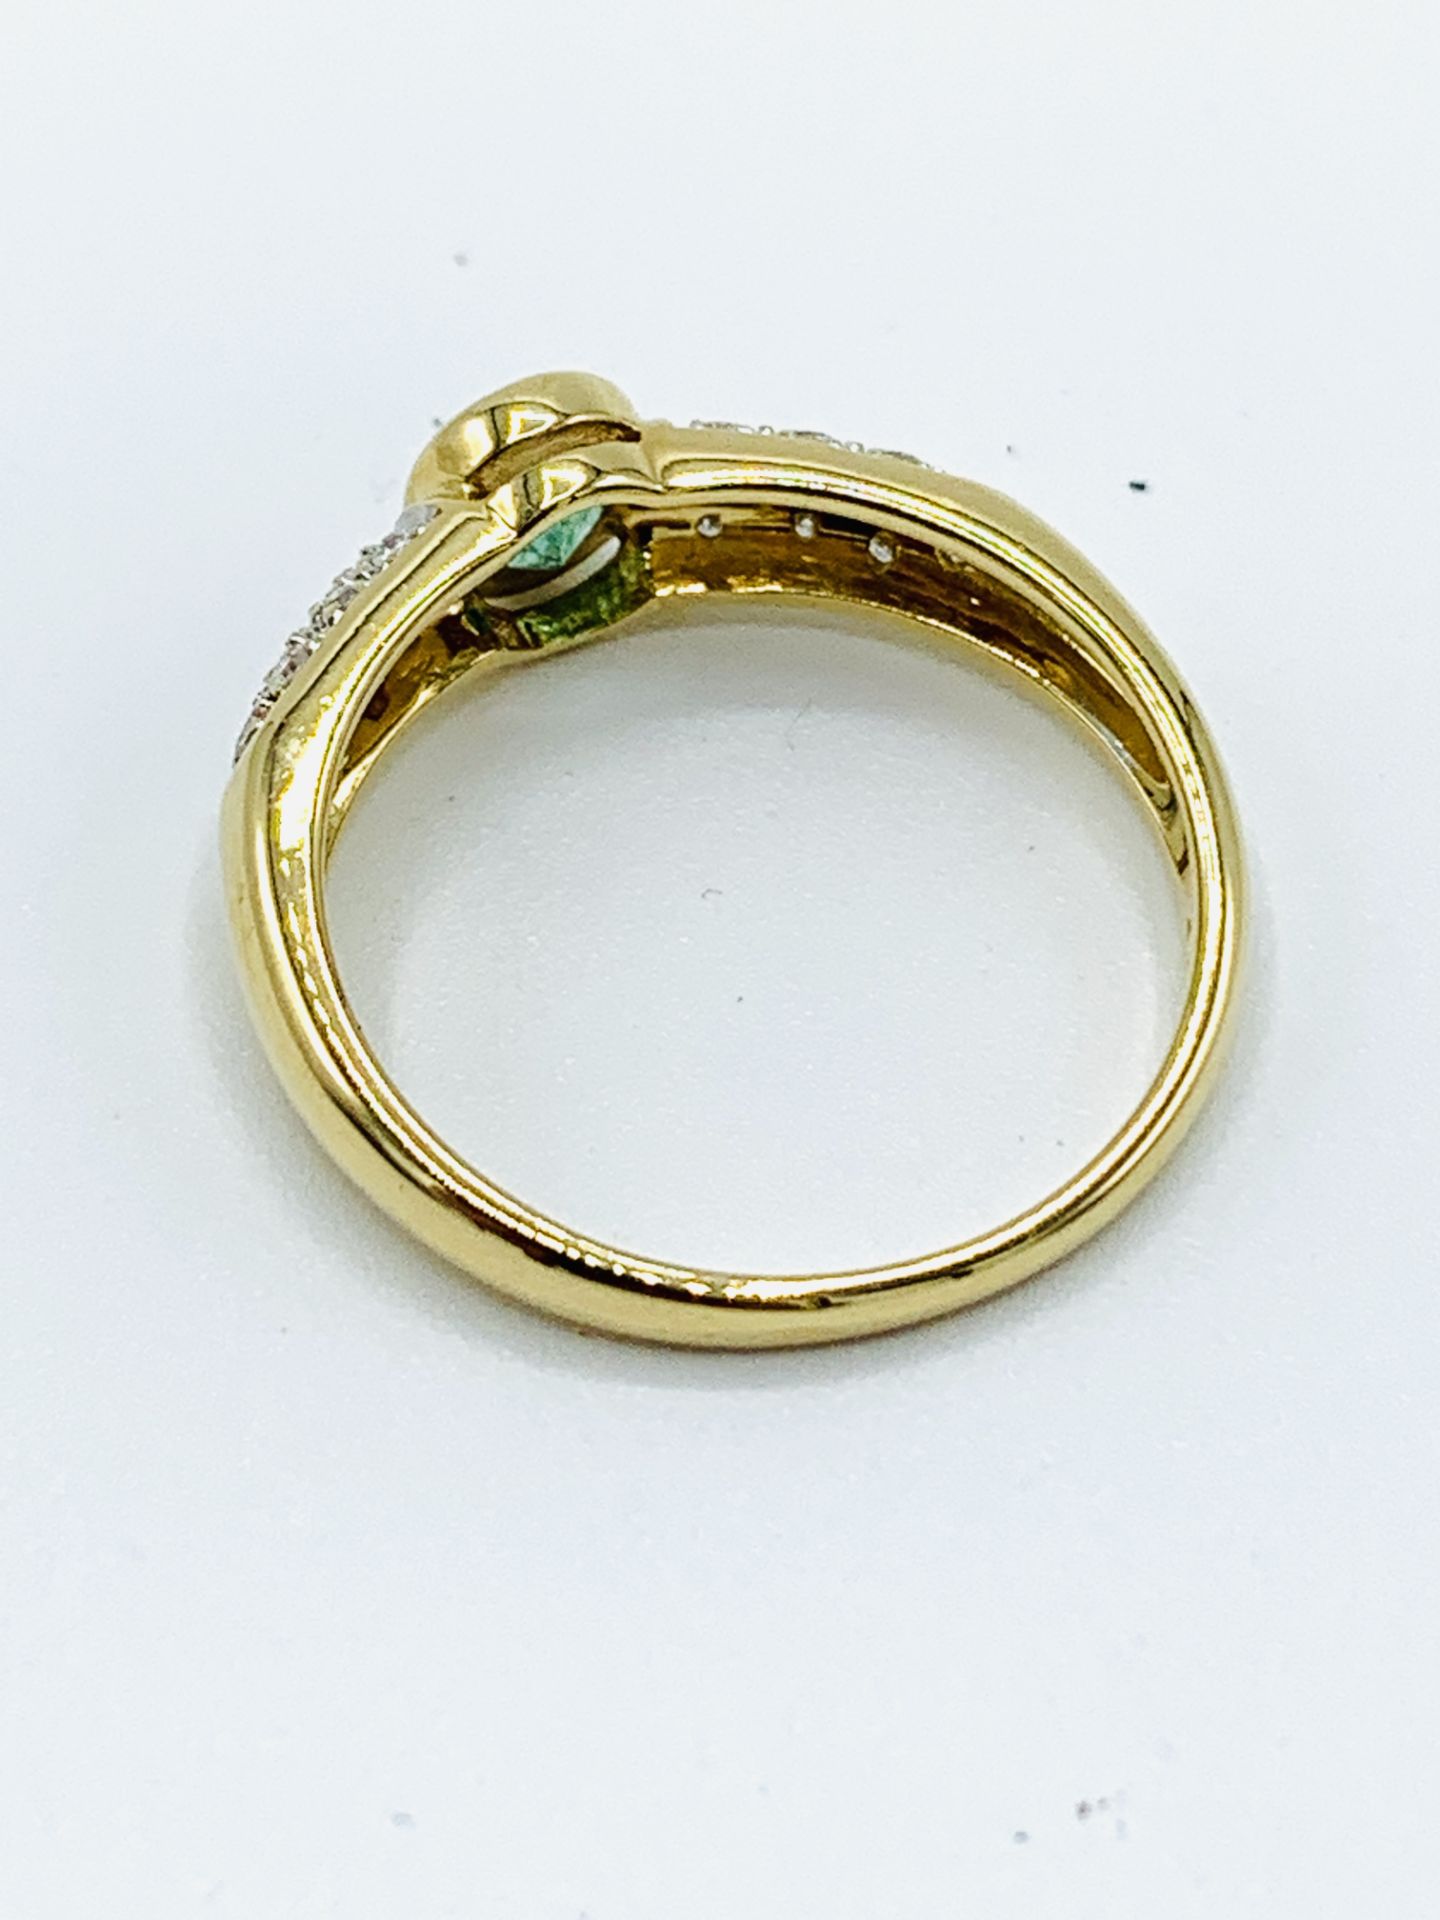 18ct gold emerald and diamond ring - Image 3 of 5